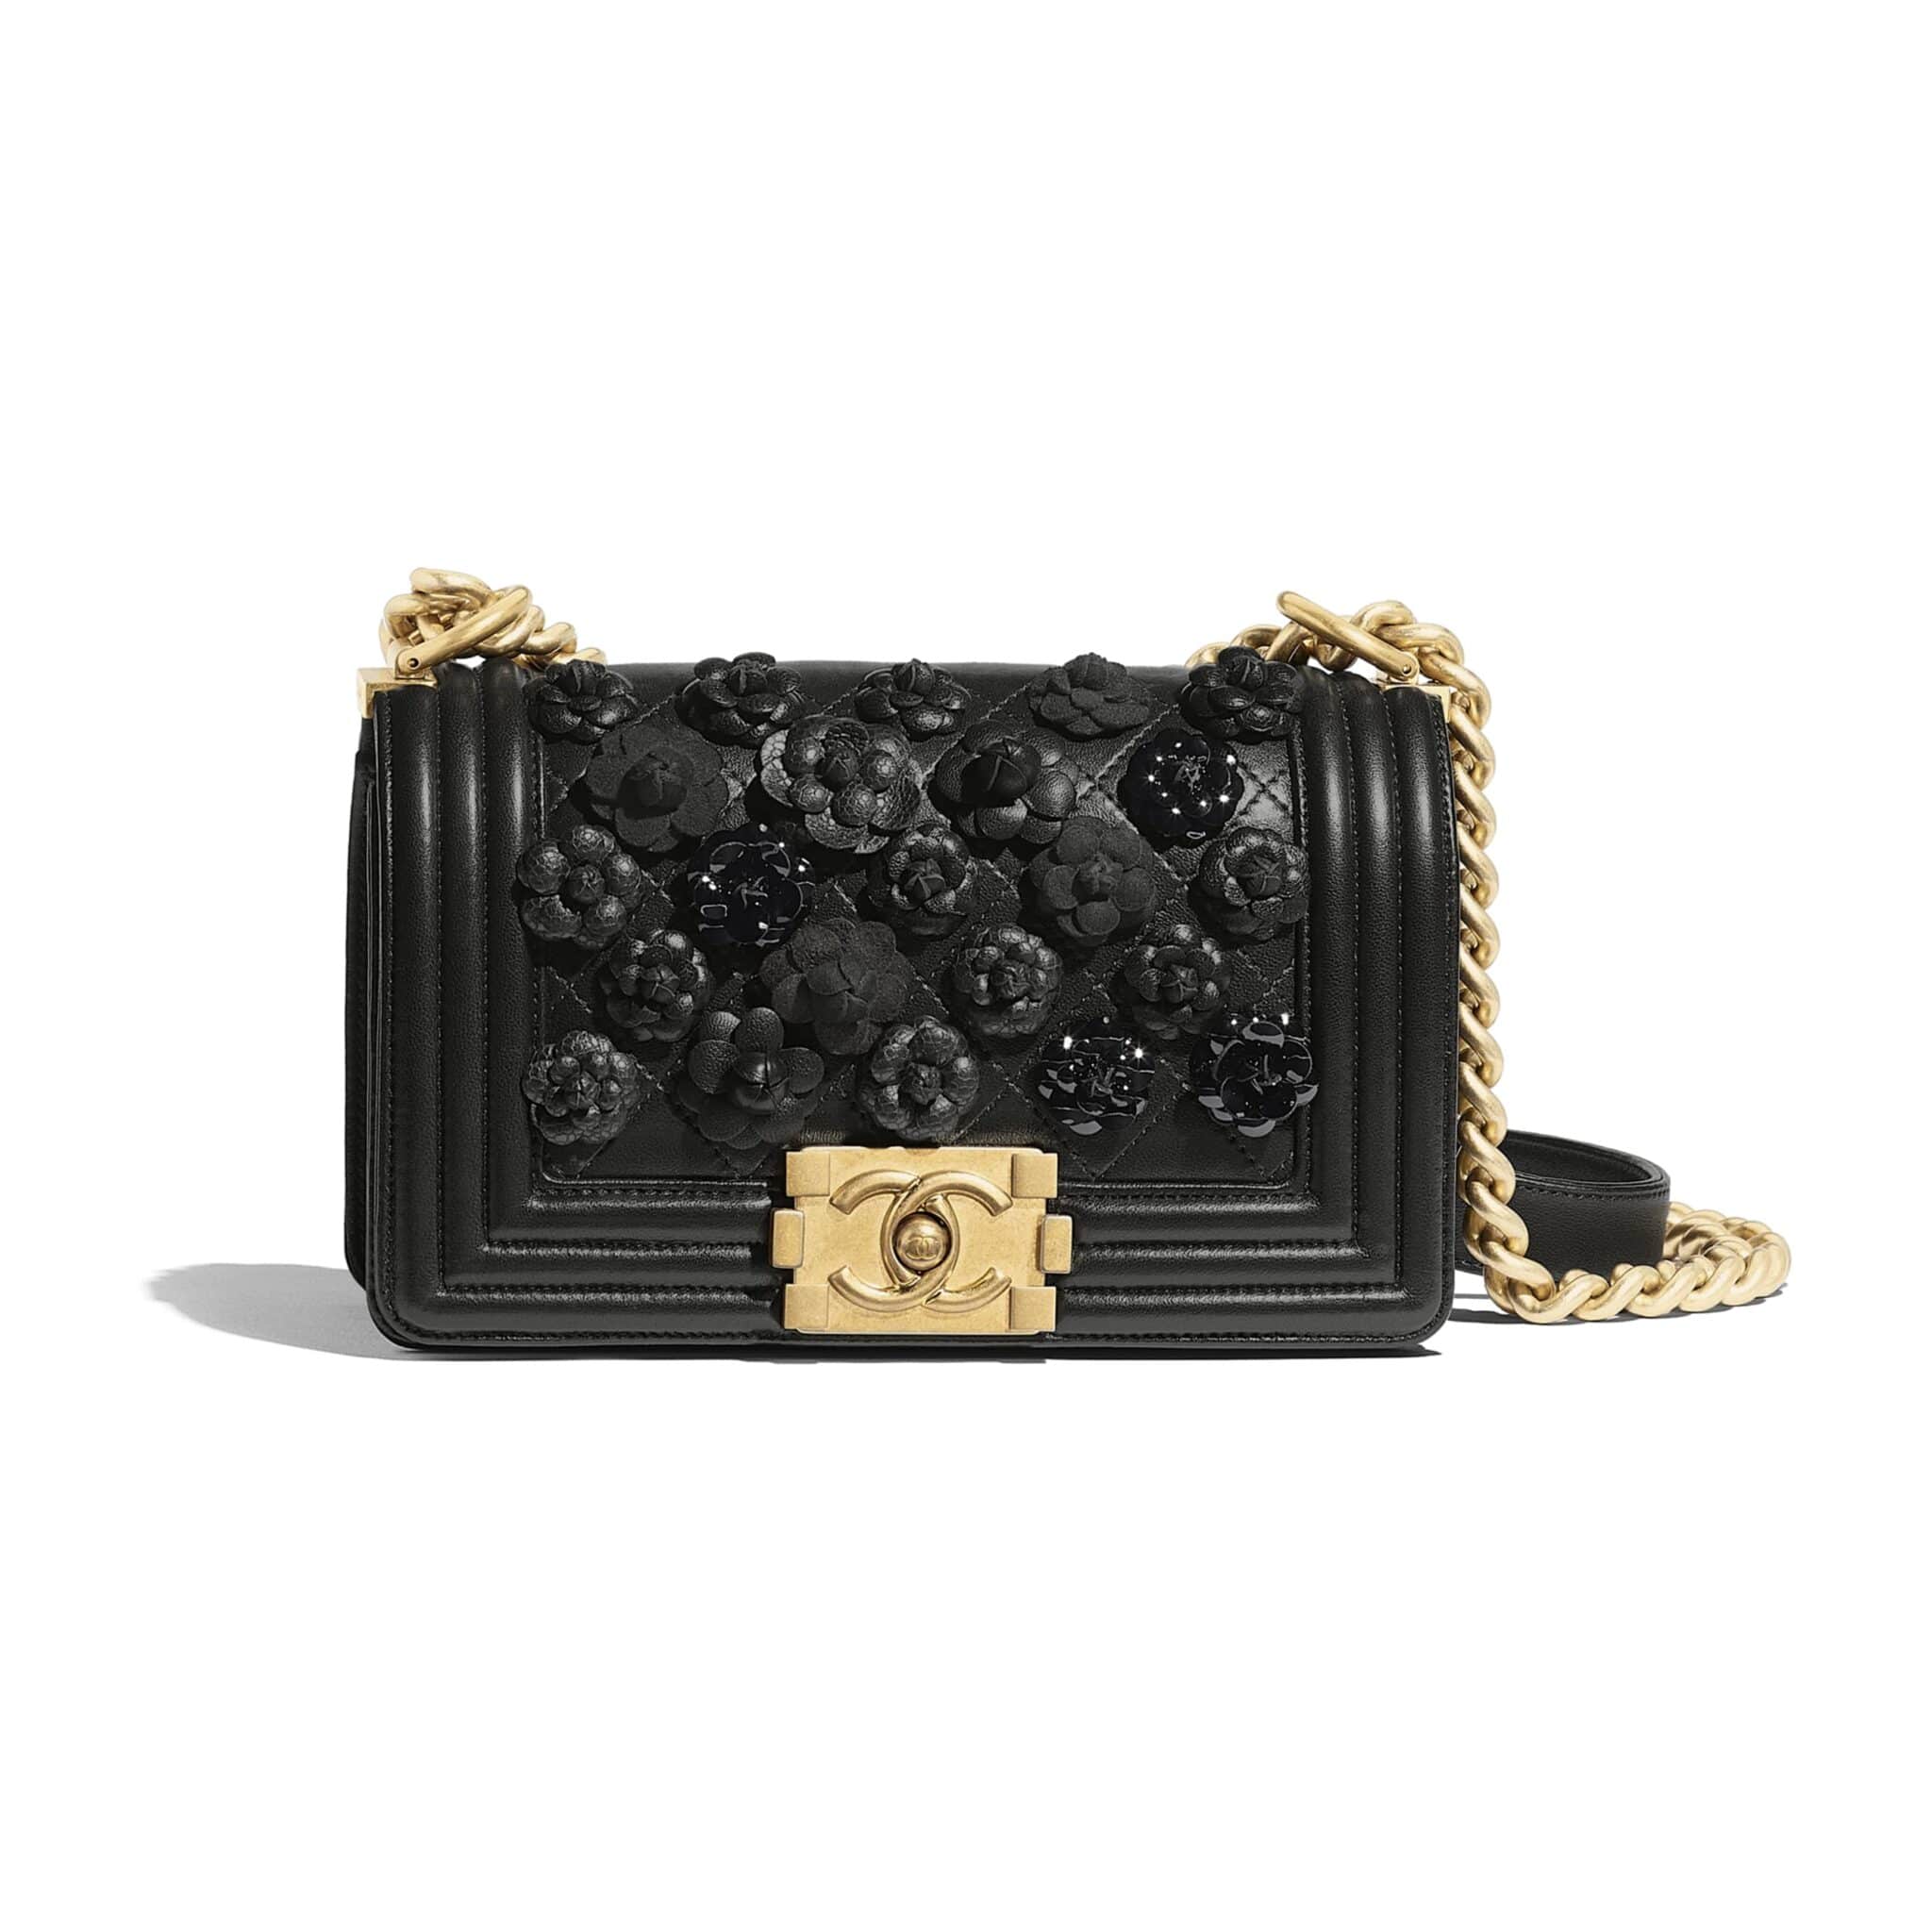 Chanel bags editorial stock photo Image of counter  103270613